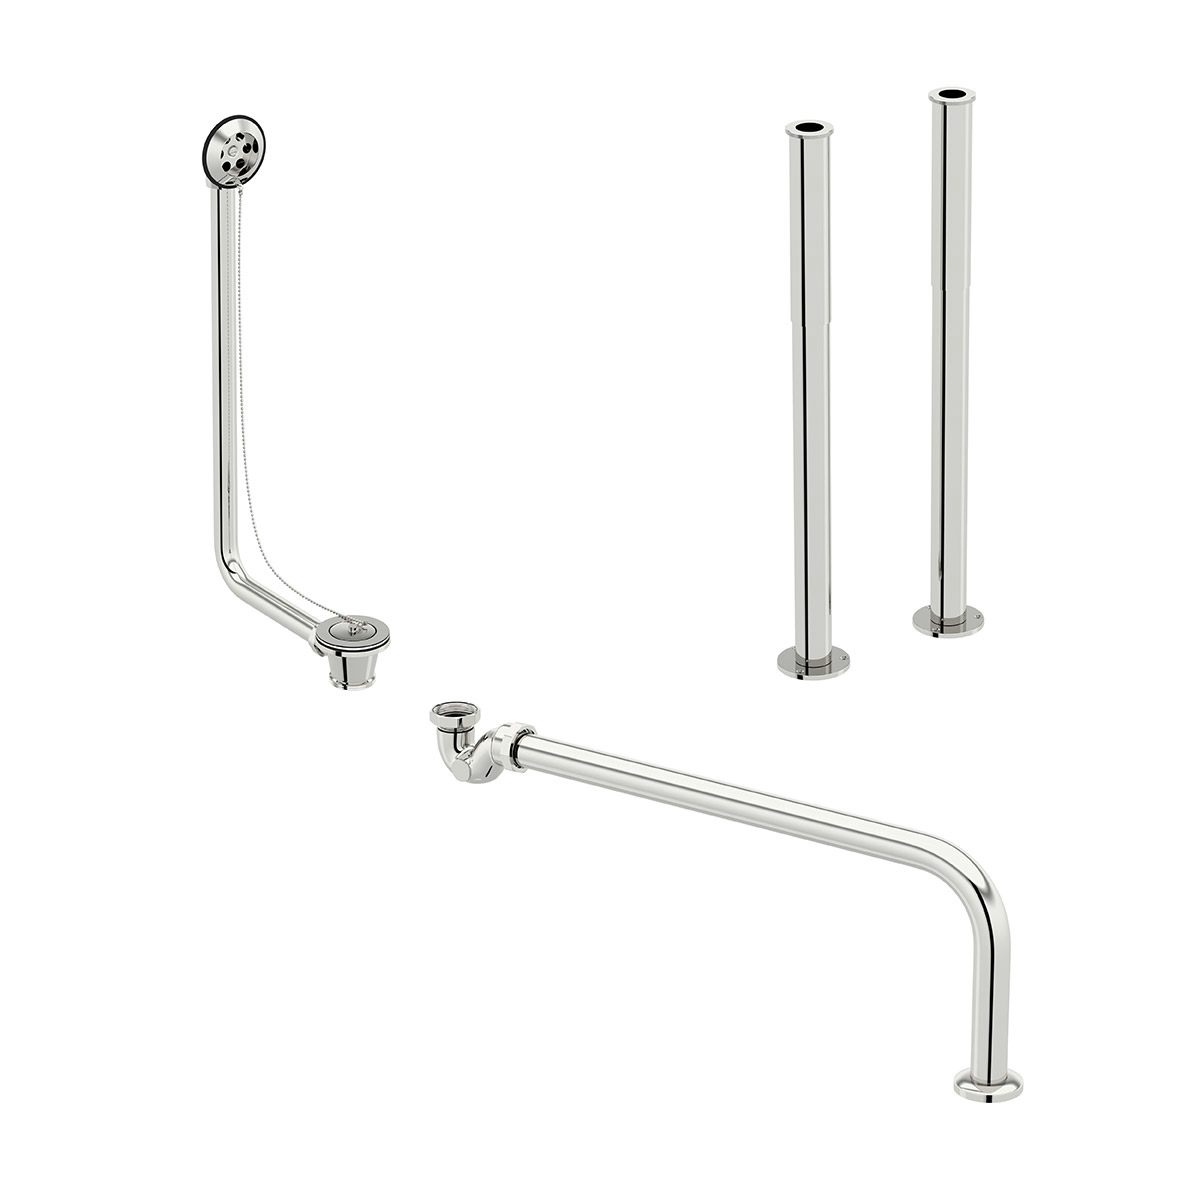 Orchard Traditional roll top bath waste and tap adjustable standpipes pack